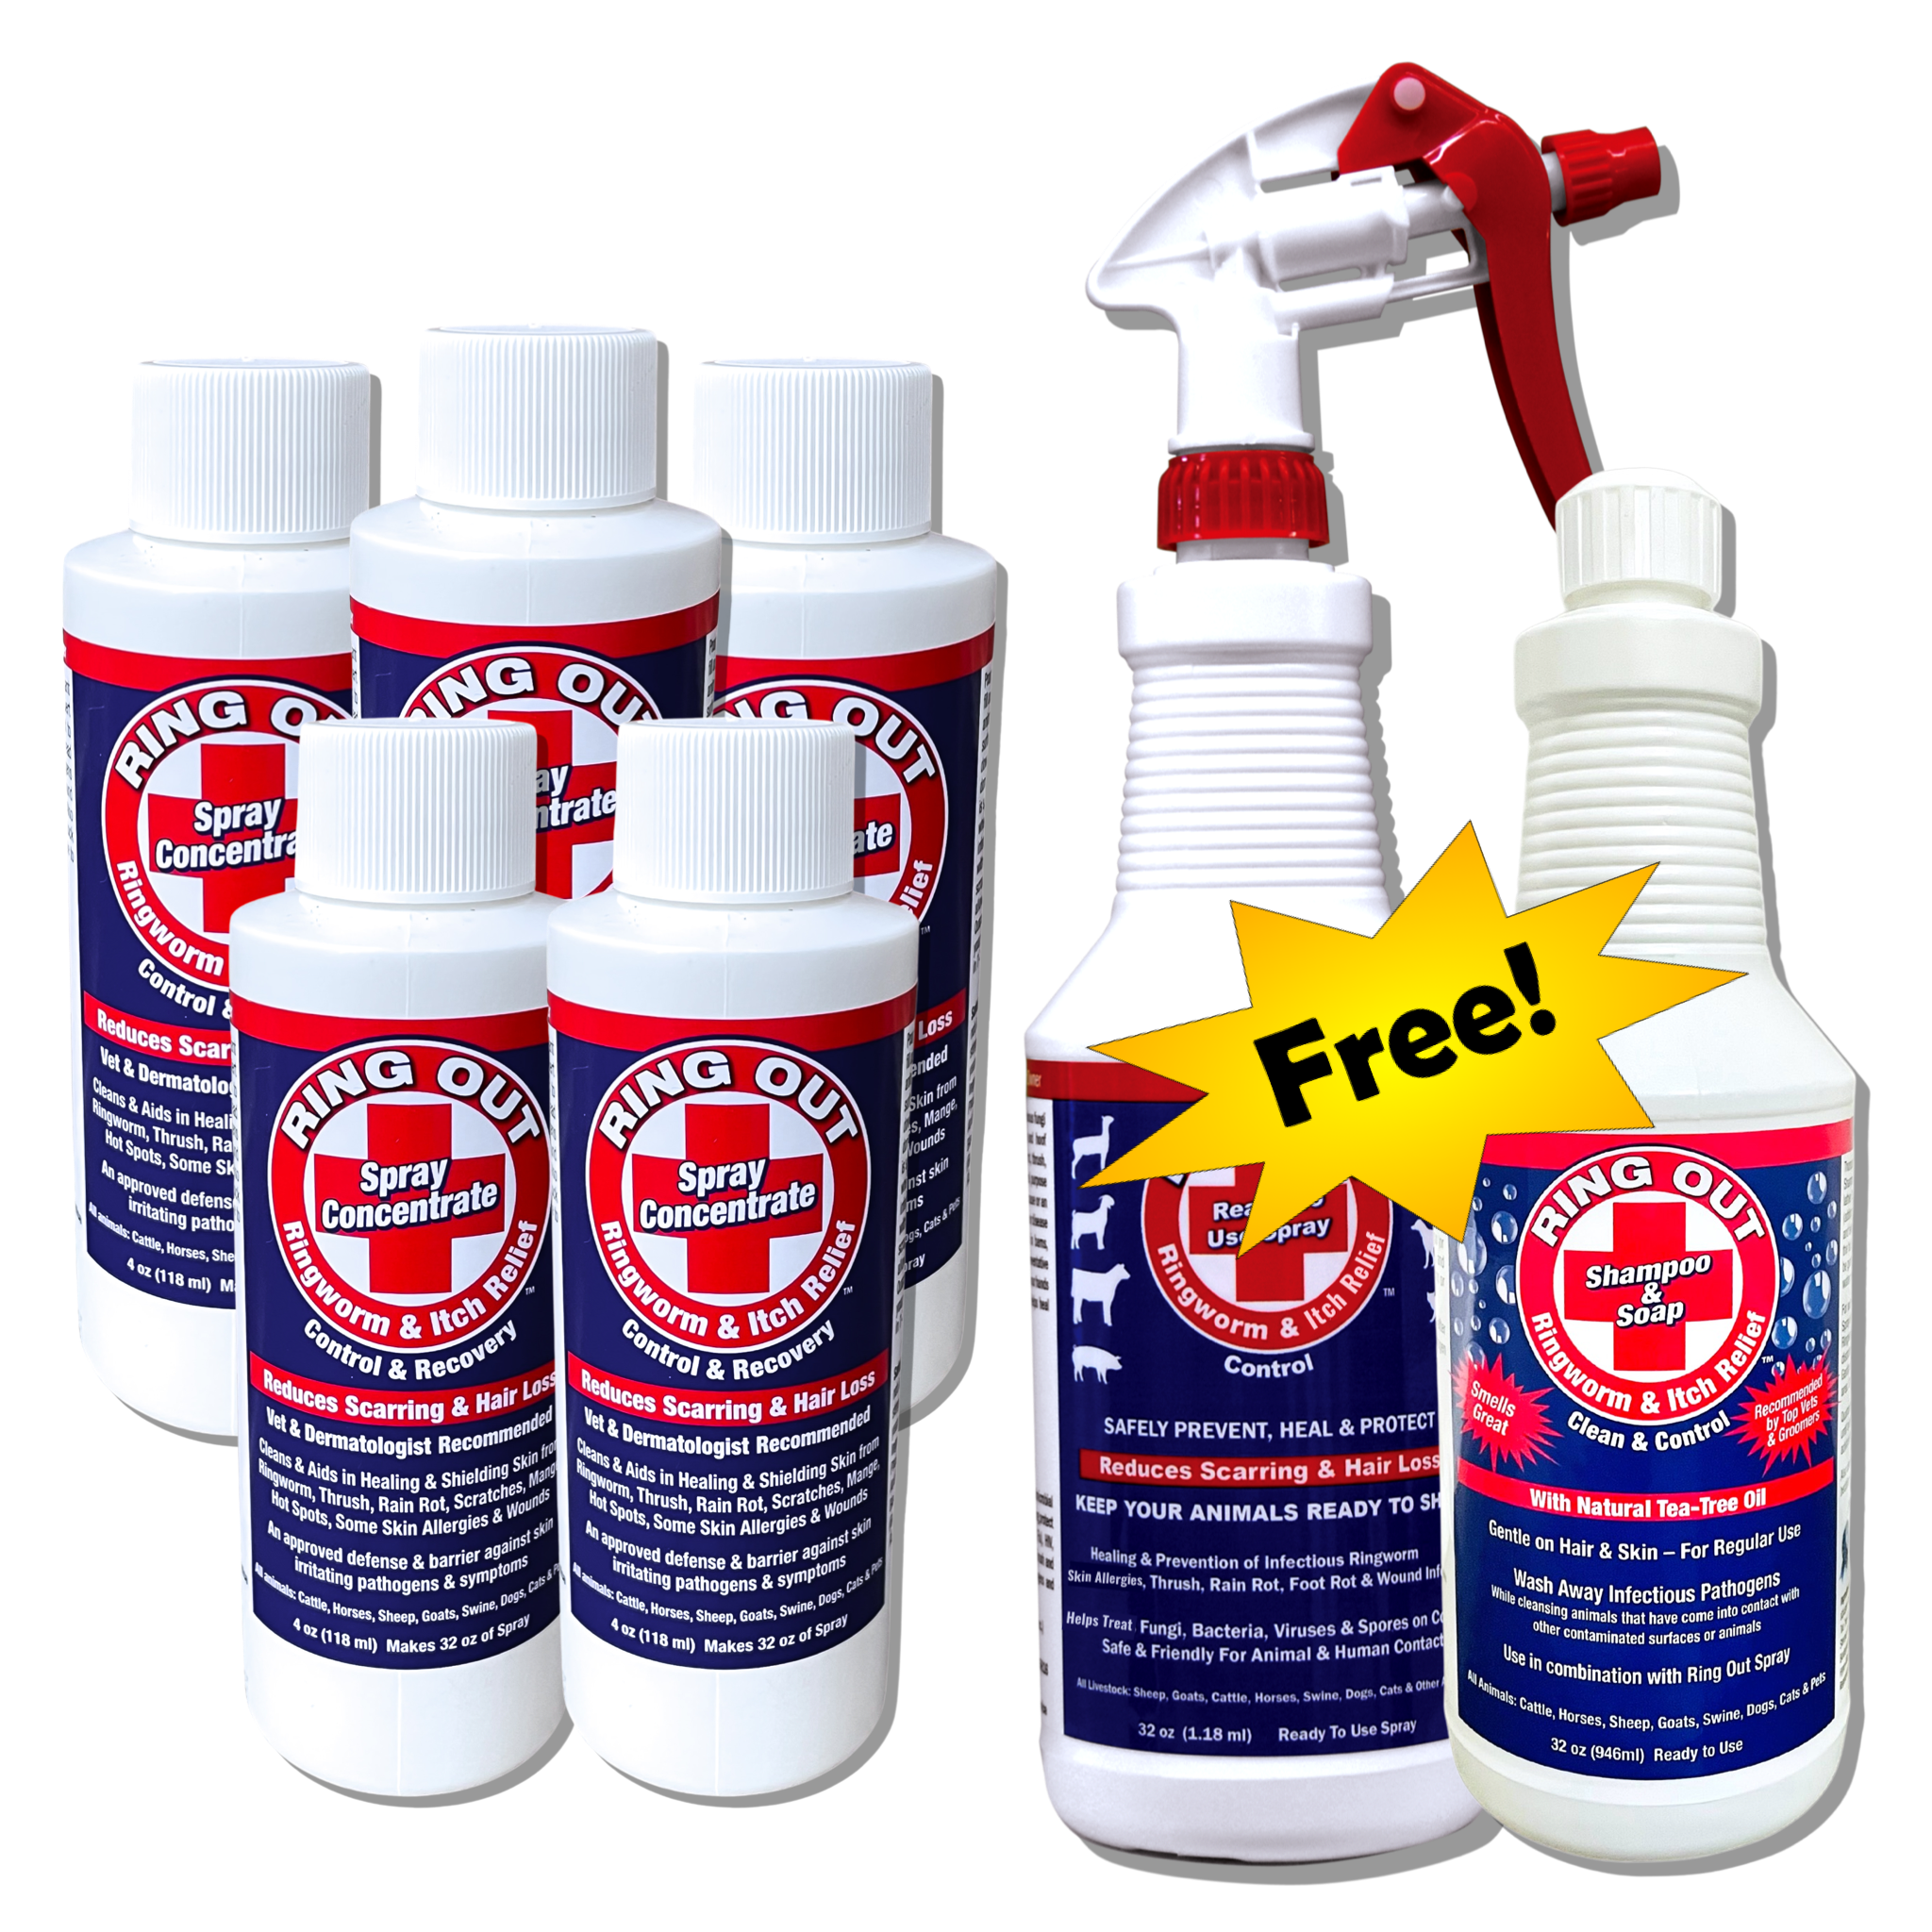 BLACK FRIDAY SPECIAL- Ring Out 5 pack - Prevent & Treat Ringworm & Fungus - Get 1 Bottle of Ring Out Shampoo & Spray Bottle Free